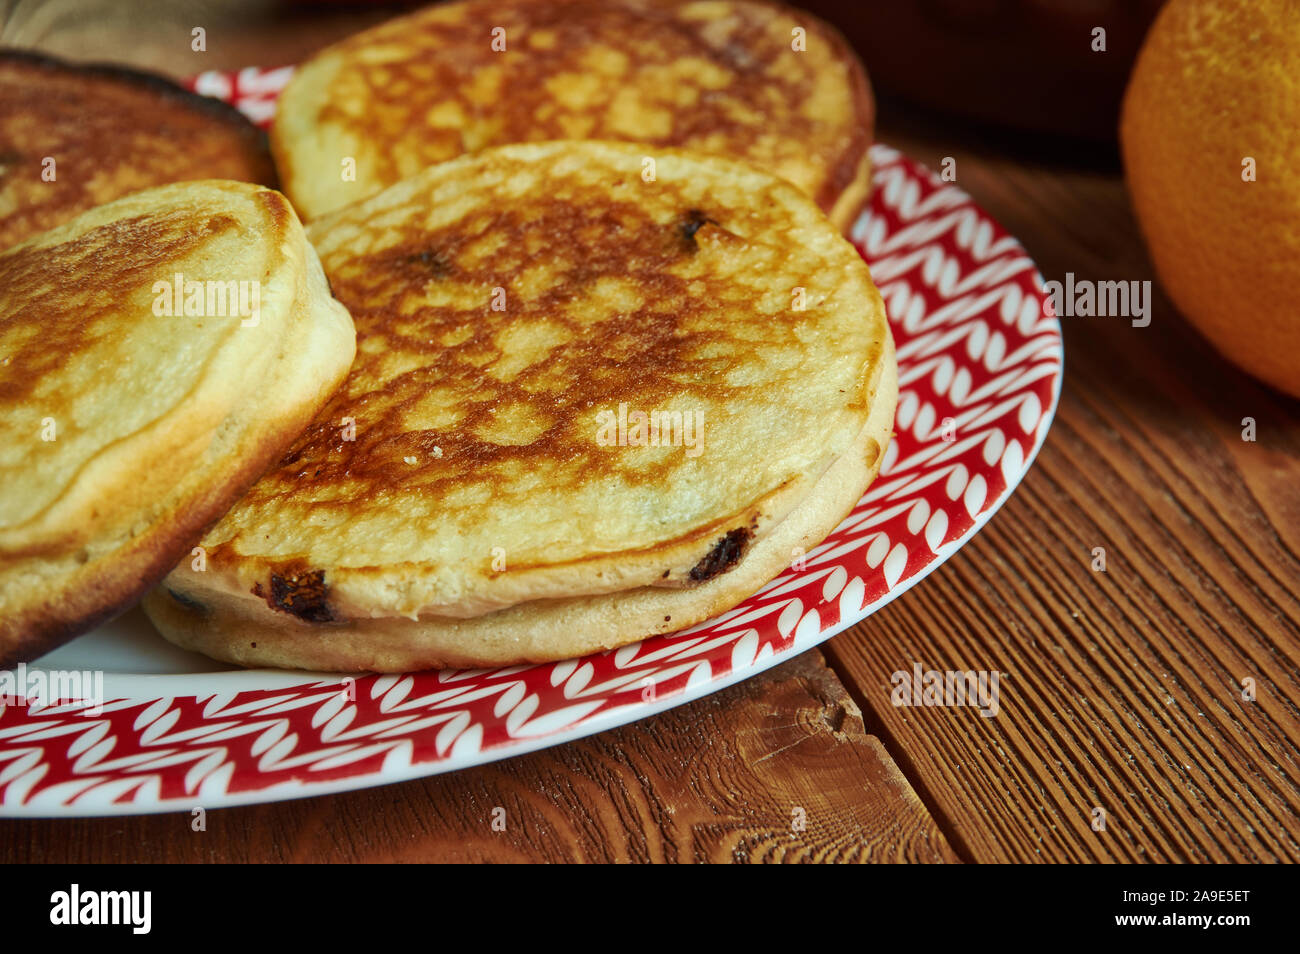 Banfora Welshcakes, Burkina Faso cuisine, Traditional assorted African dishes, Top view. Stock Photo